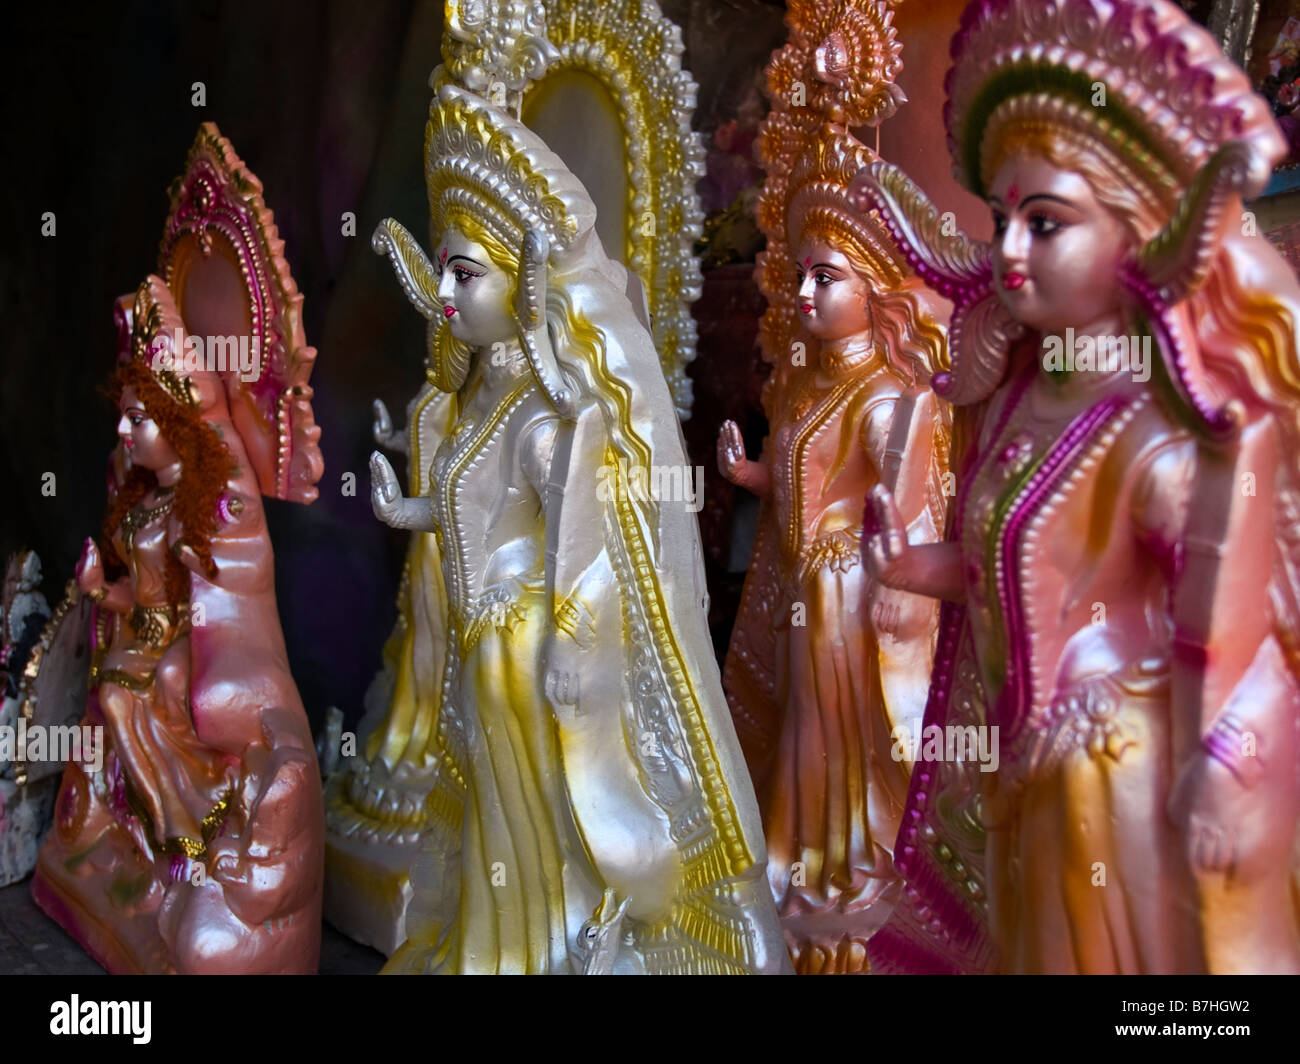 mould-made plastic figures of the Hindu goddess Saraswati stand on a shelf in a workshop Stock Photo